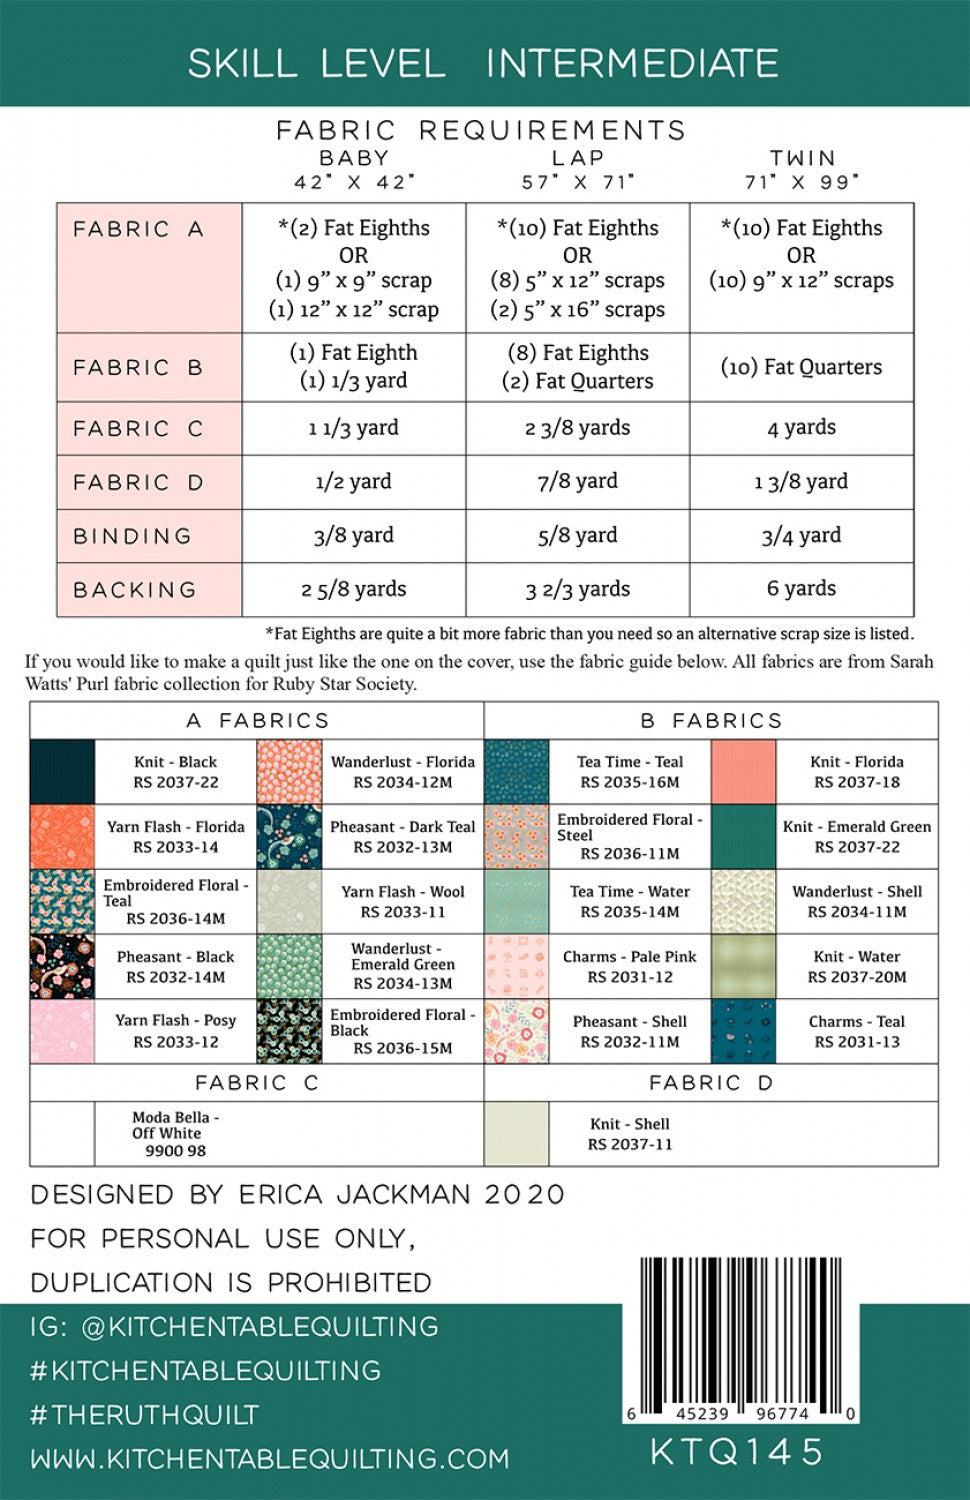 The Ruth Quilt Pattern by Kitchen Table Quilting